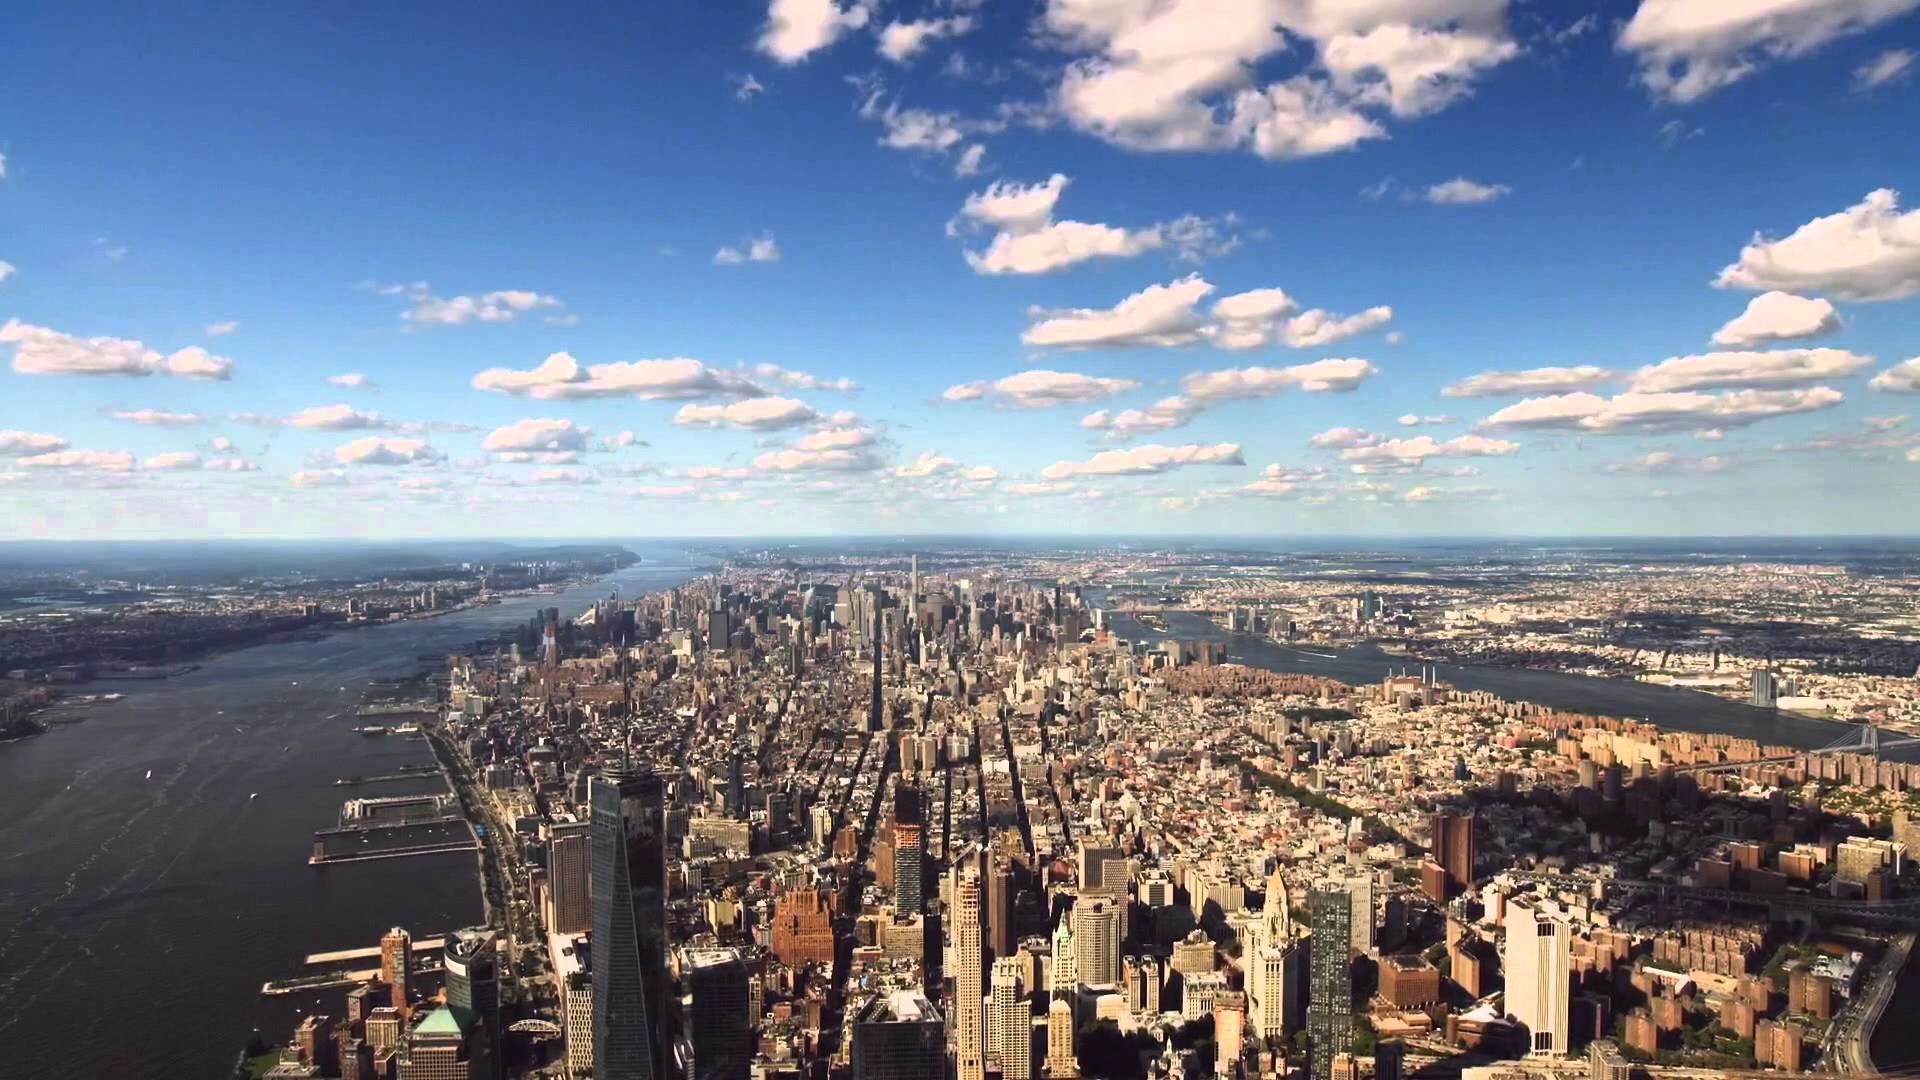 1920x1080 Apple TV 4 Aerial Screensaver - New York City (Day) + Download - YouTube